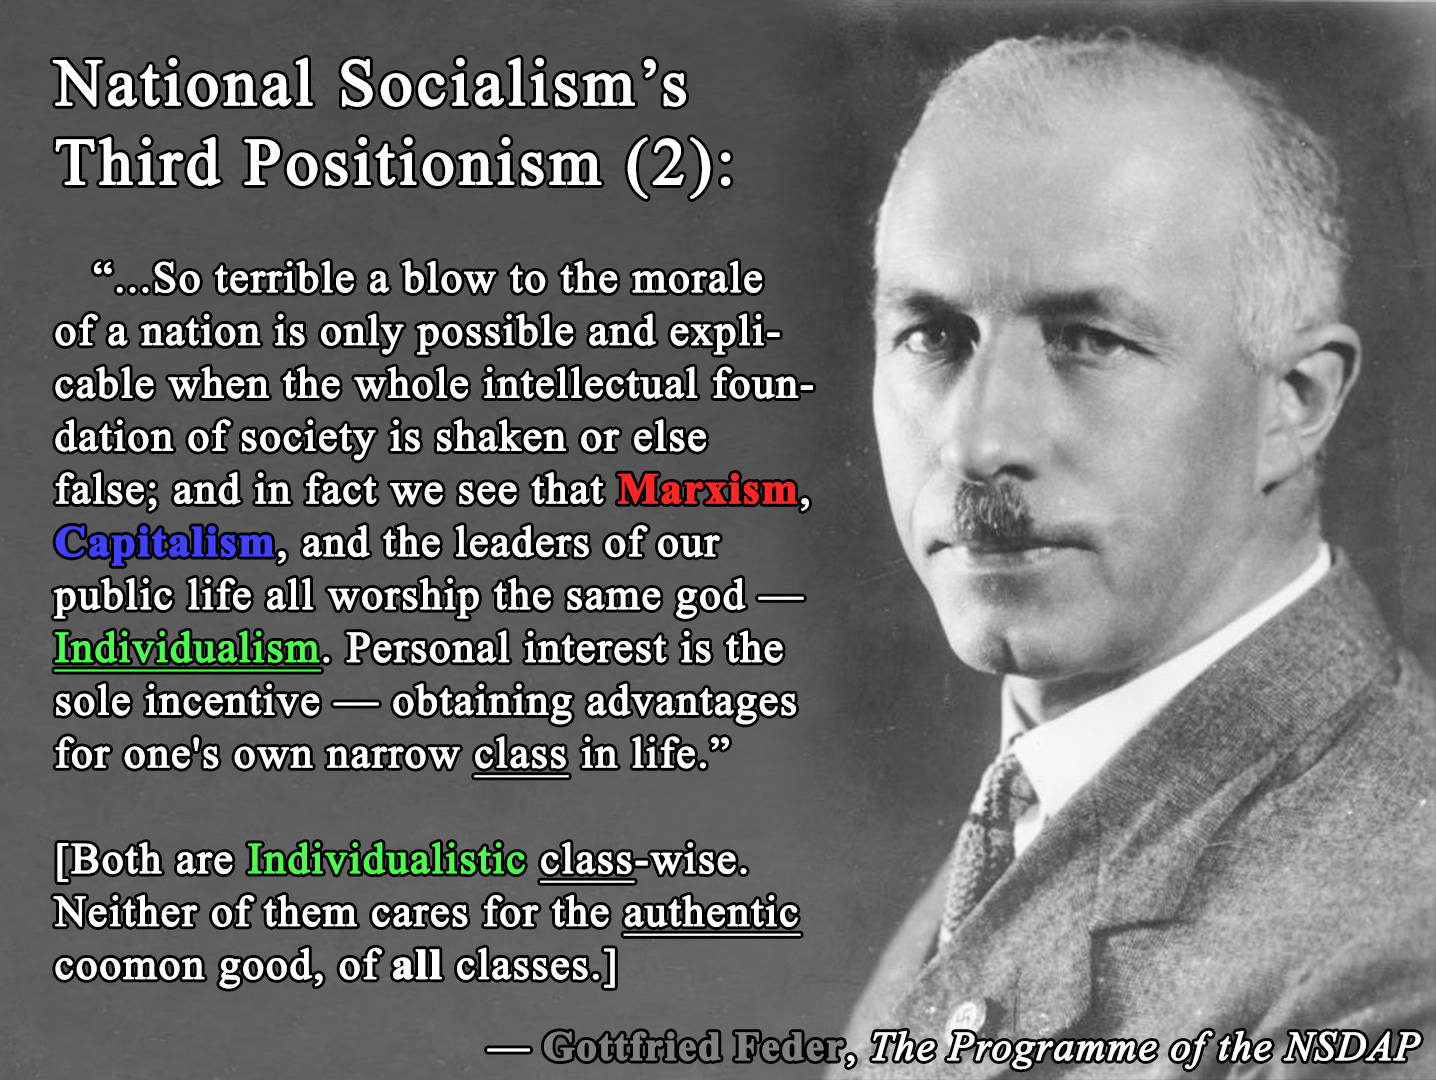 National Socialism’s Third Positionism by Gottfried Feder (2)